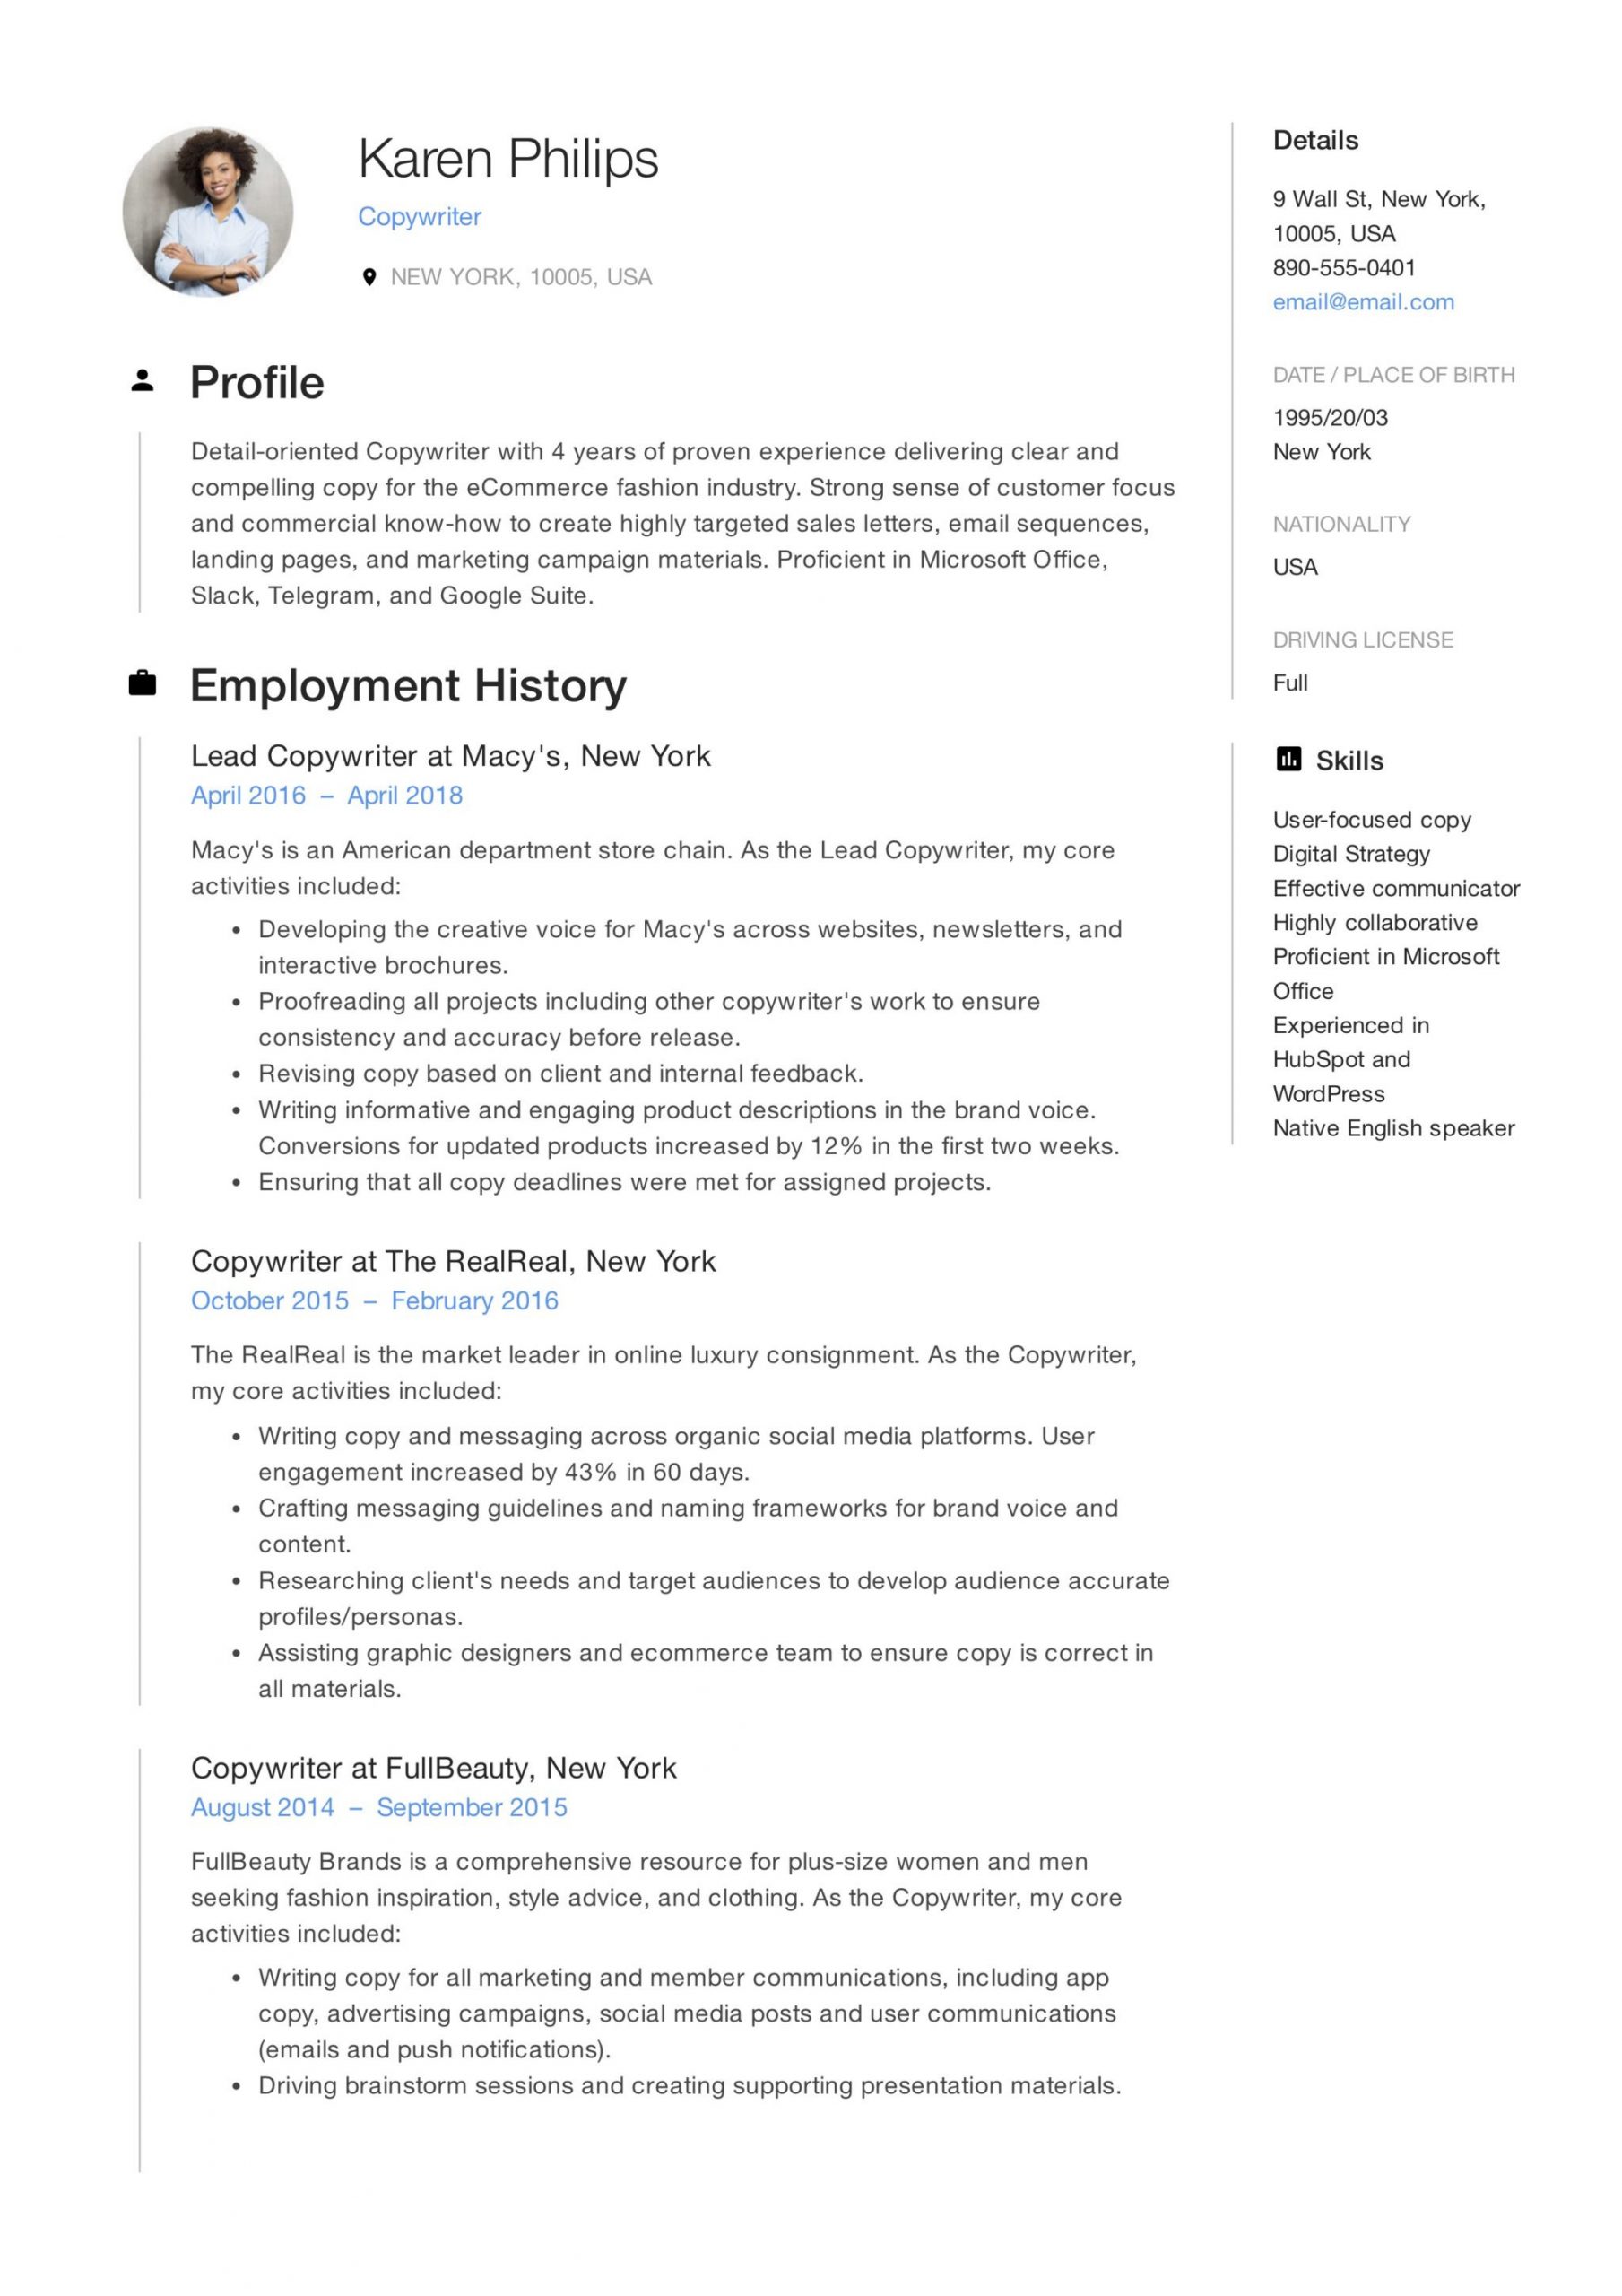 Sample Resume for Content Writer Fresher Content Writer Resume Objective October 2021